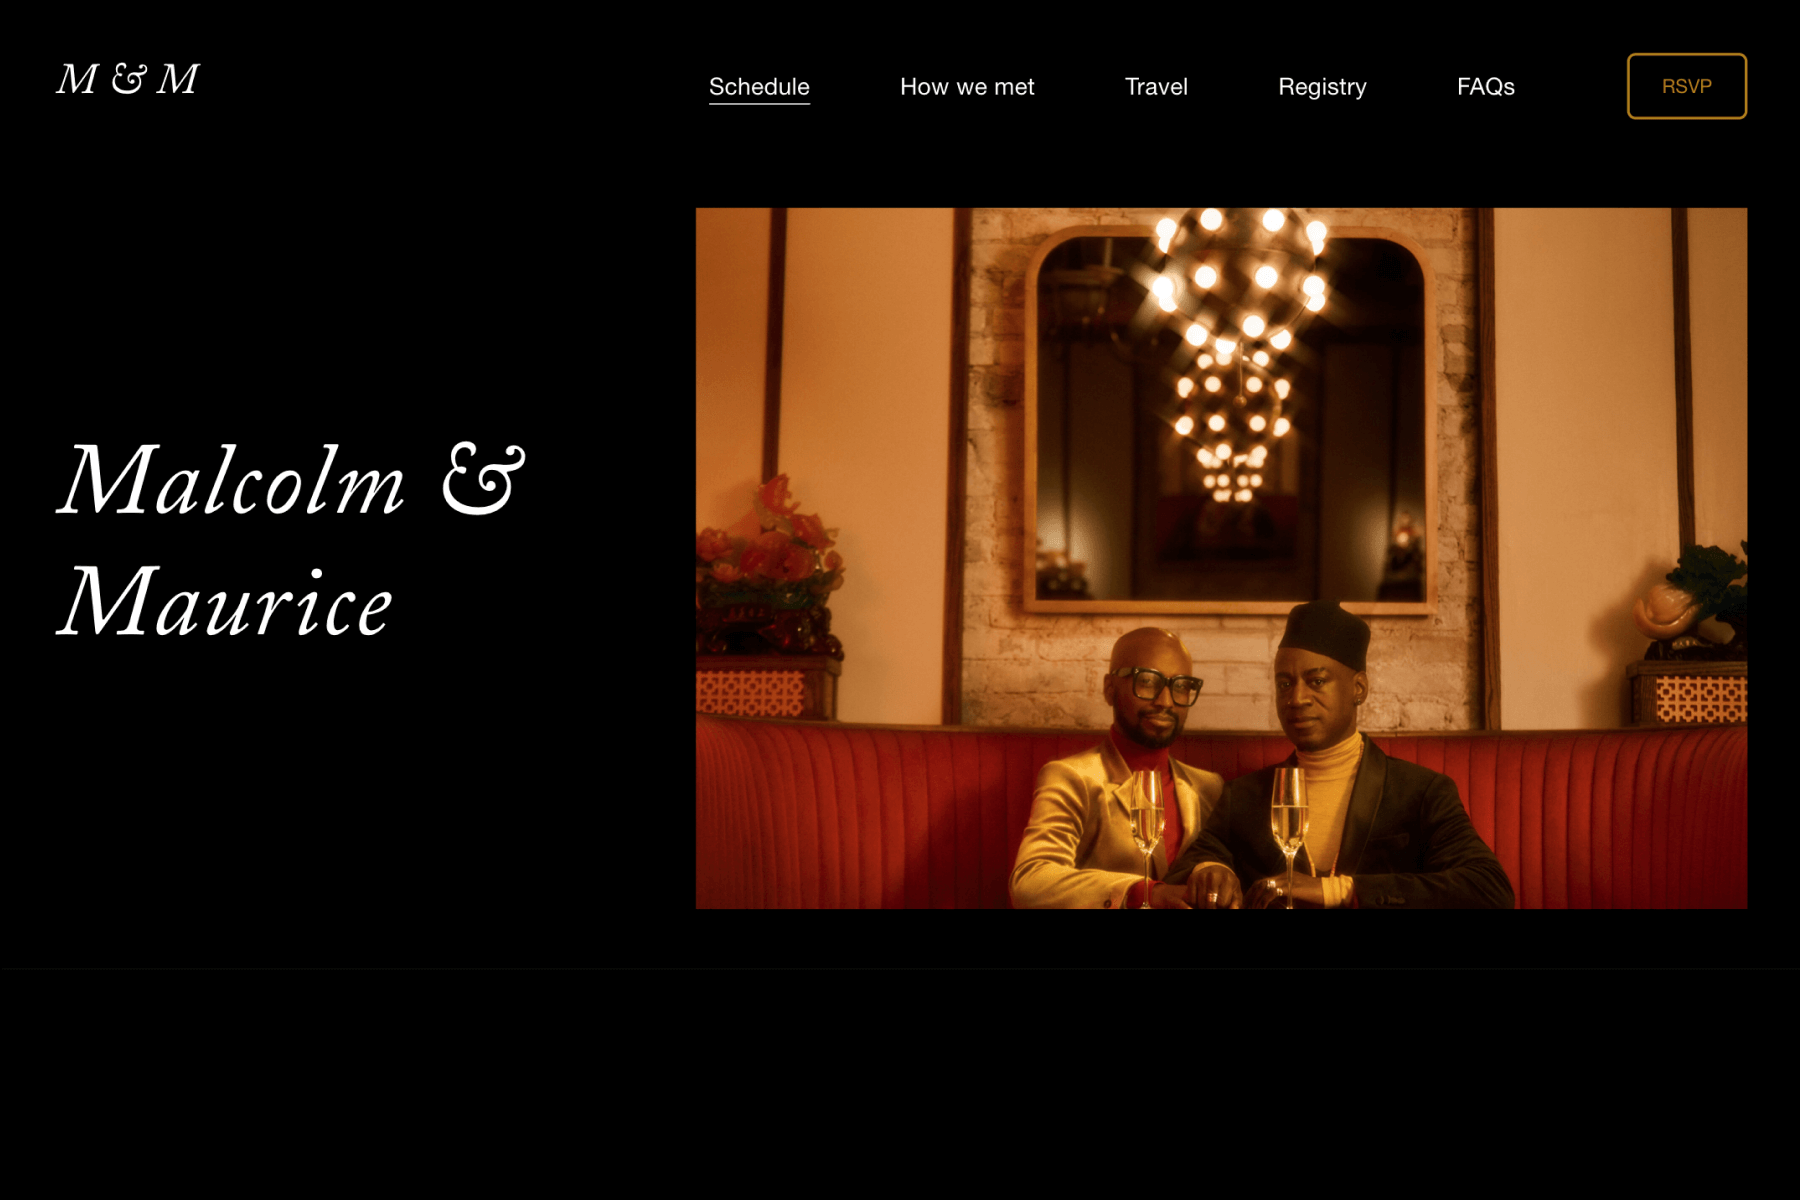 A screenshot of a wedding website shows a photo of two men sitting at a red booth bench, with a black backdrop and the names “Malcolm & Maurice.”